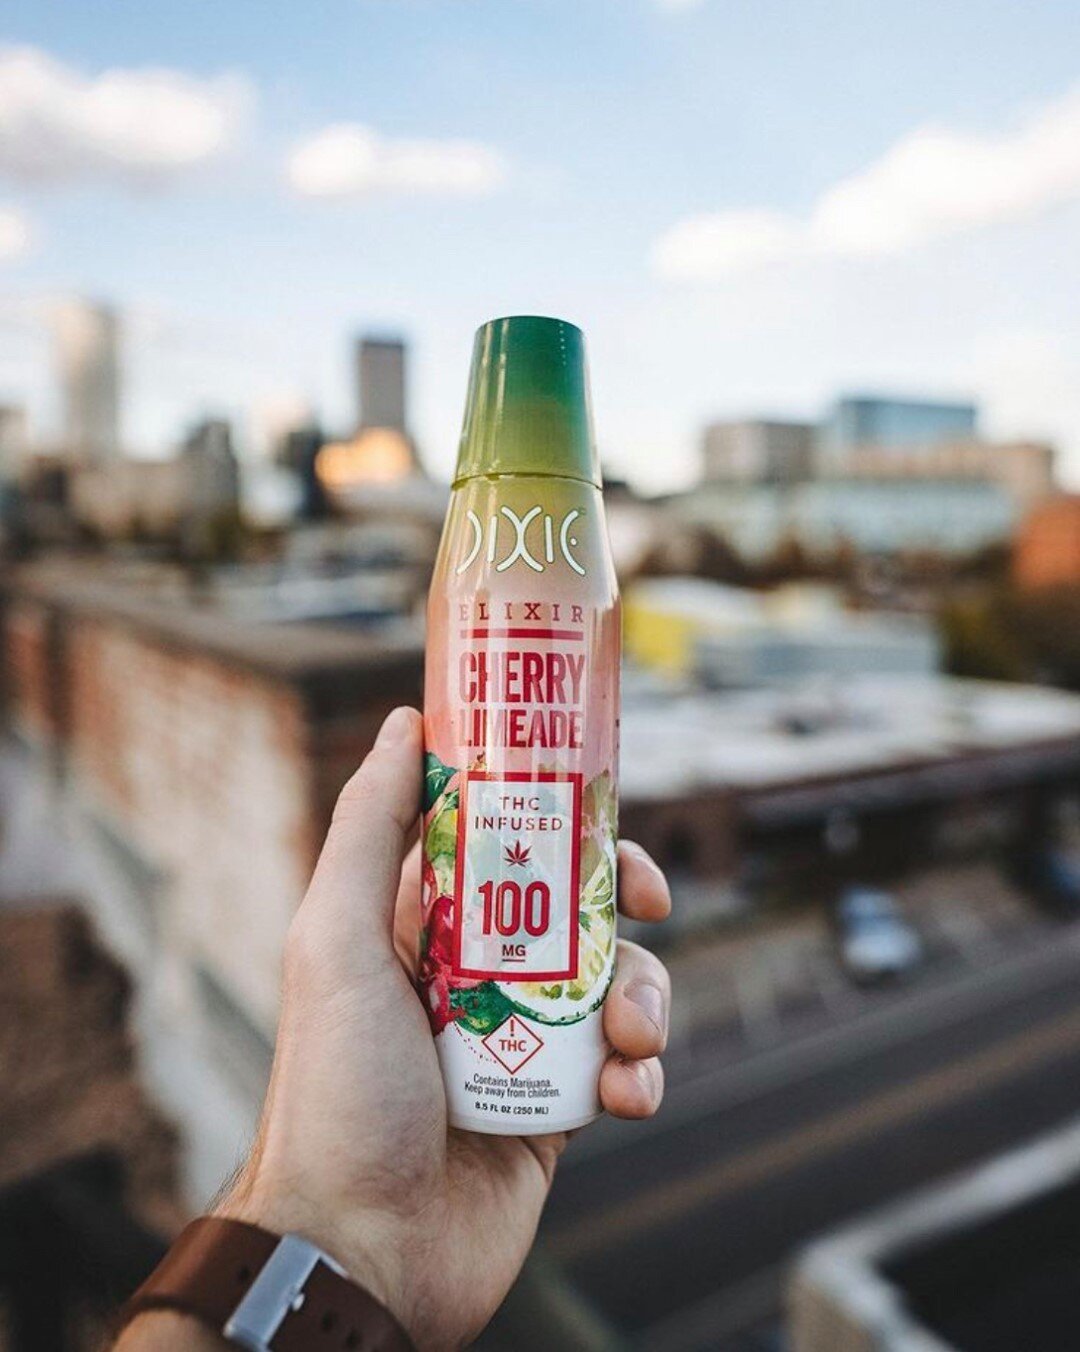 Did you know? 🤔 

All Dixie Elixirs are made with pure cane sugar instead of high-fructose corn syrup and no artificial coloring so you can feel good inside and out!

📸: @jointnostalgia
Nothing for sale! 21+ only!
#cannabisdrinks #normalizecannabis